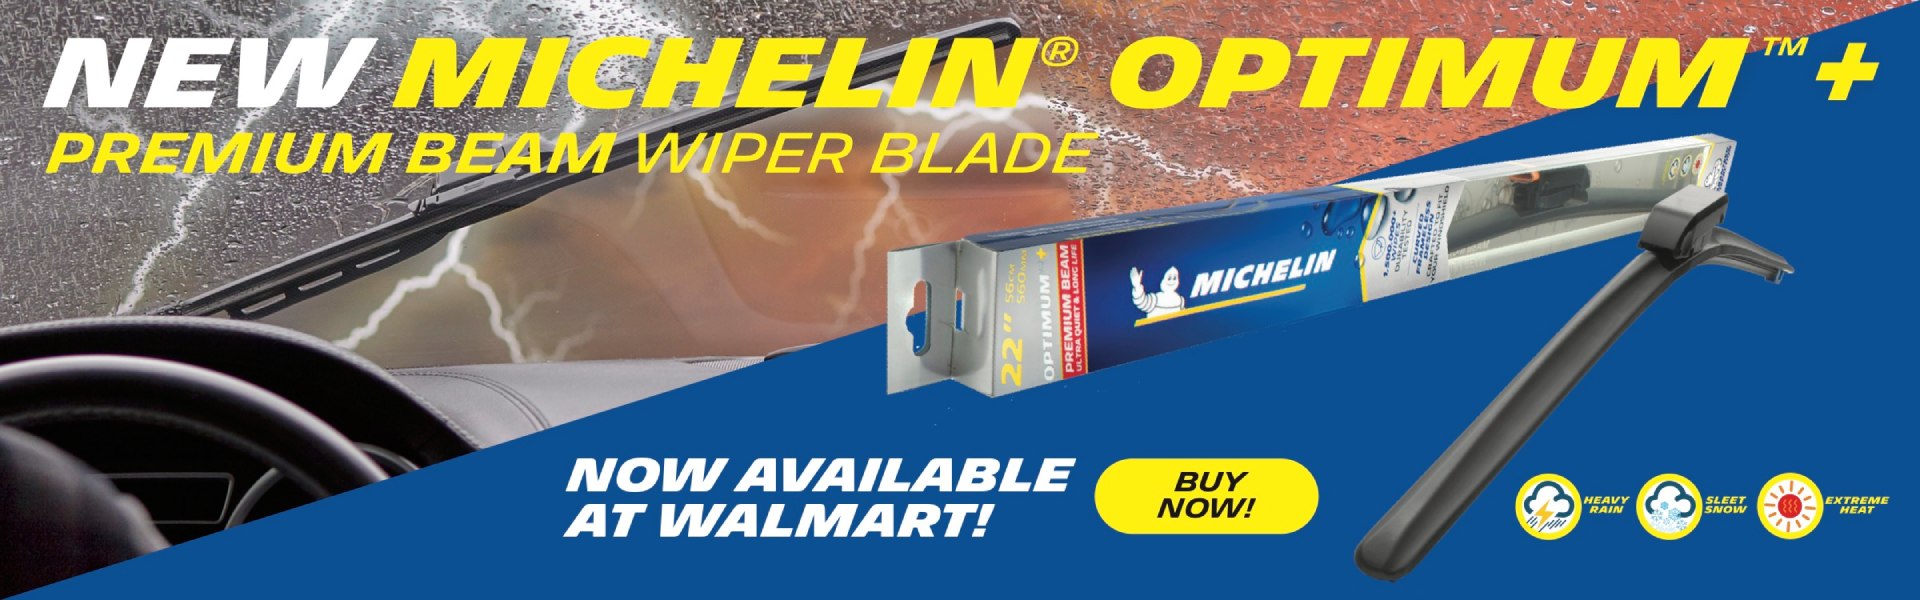 New MICHELIN Optimum plus premium beam wiper blade. Click to learn more and buy now.